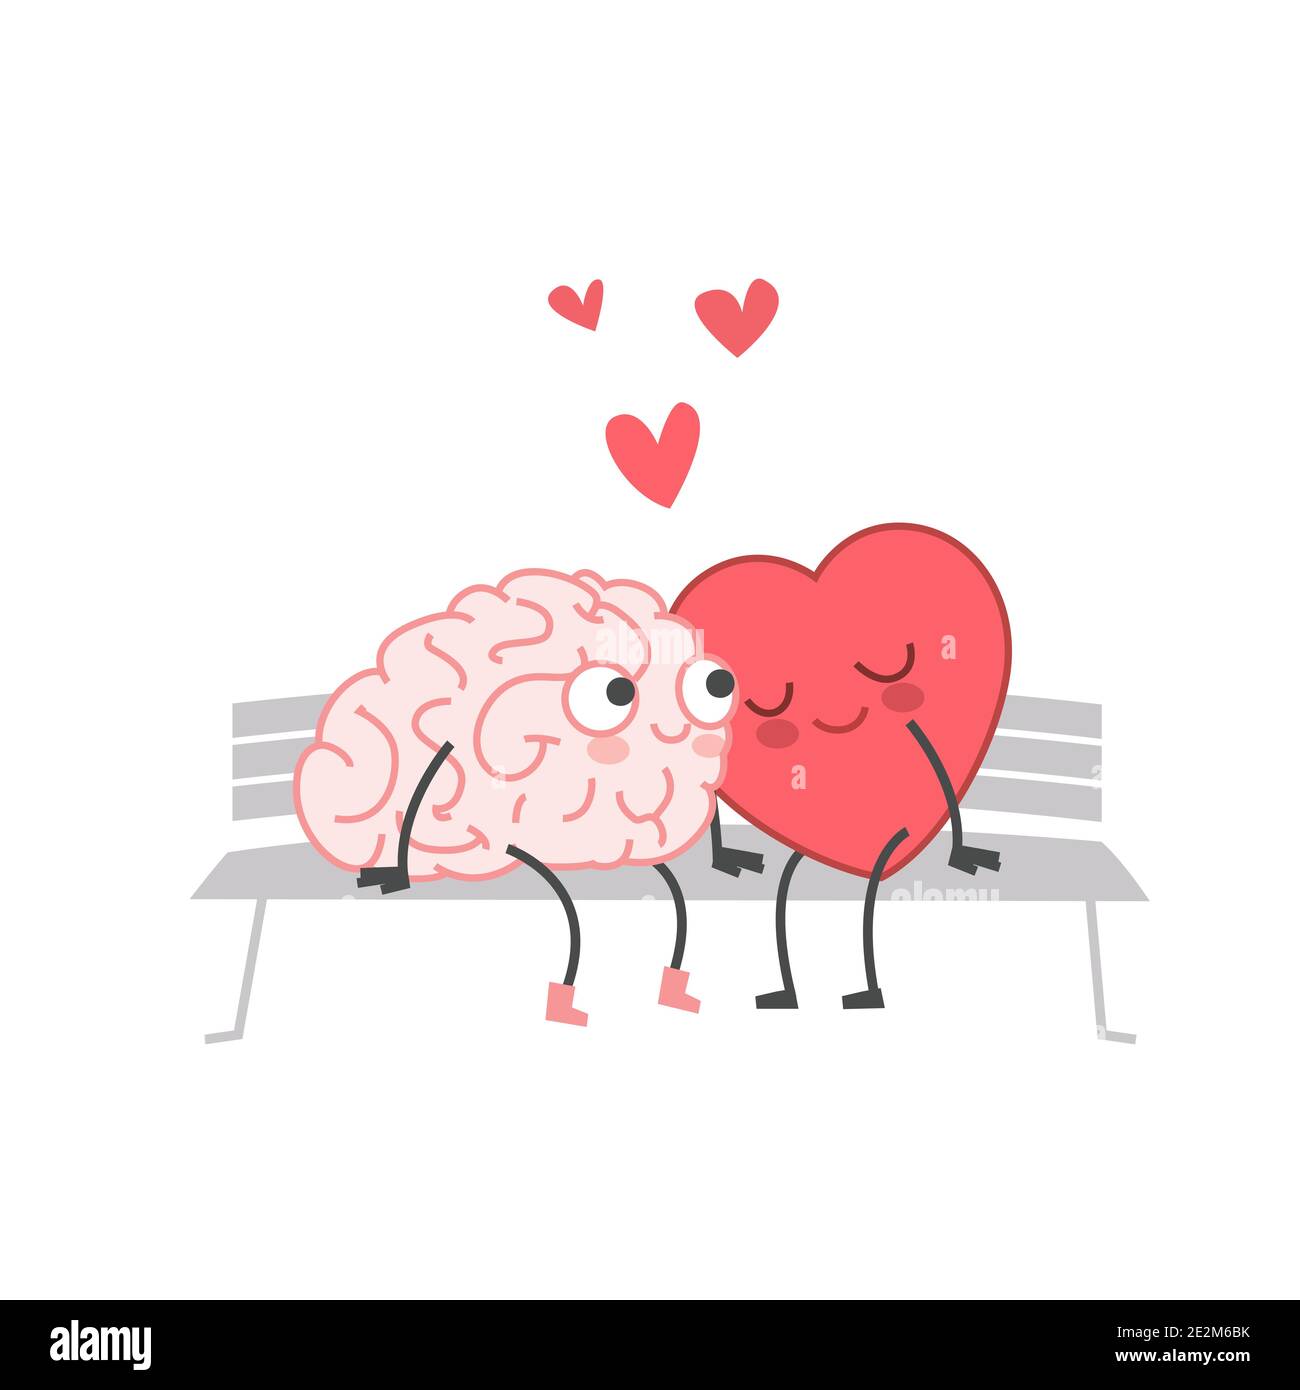 Cartoon Illustration of the Heart and Brain sit on the Bench and Kiss. Heart and Brain are in love hold hands and kiss each other. Happy Valentines Stock Vector